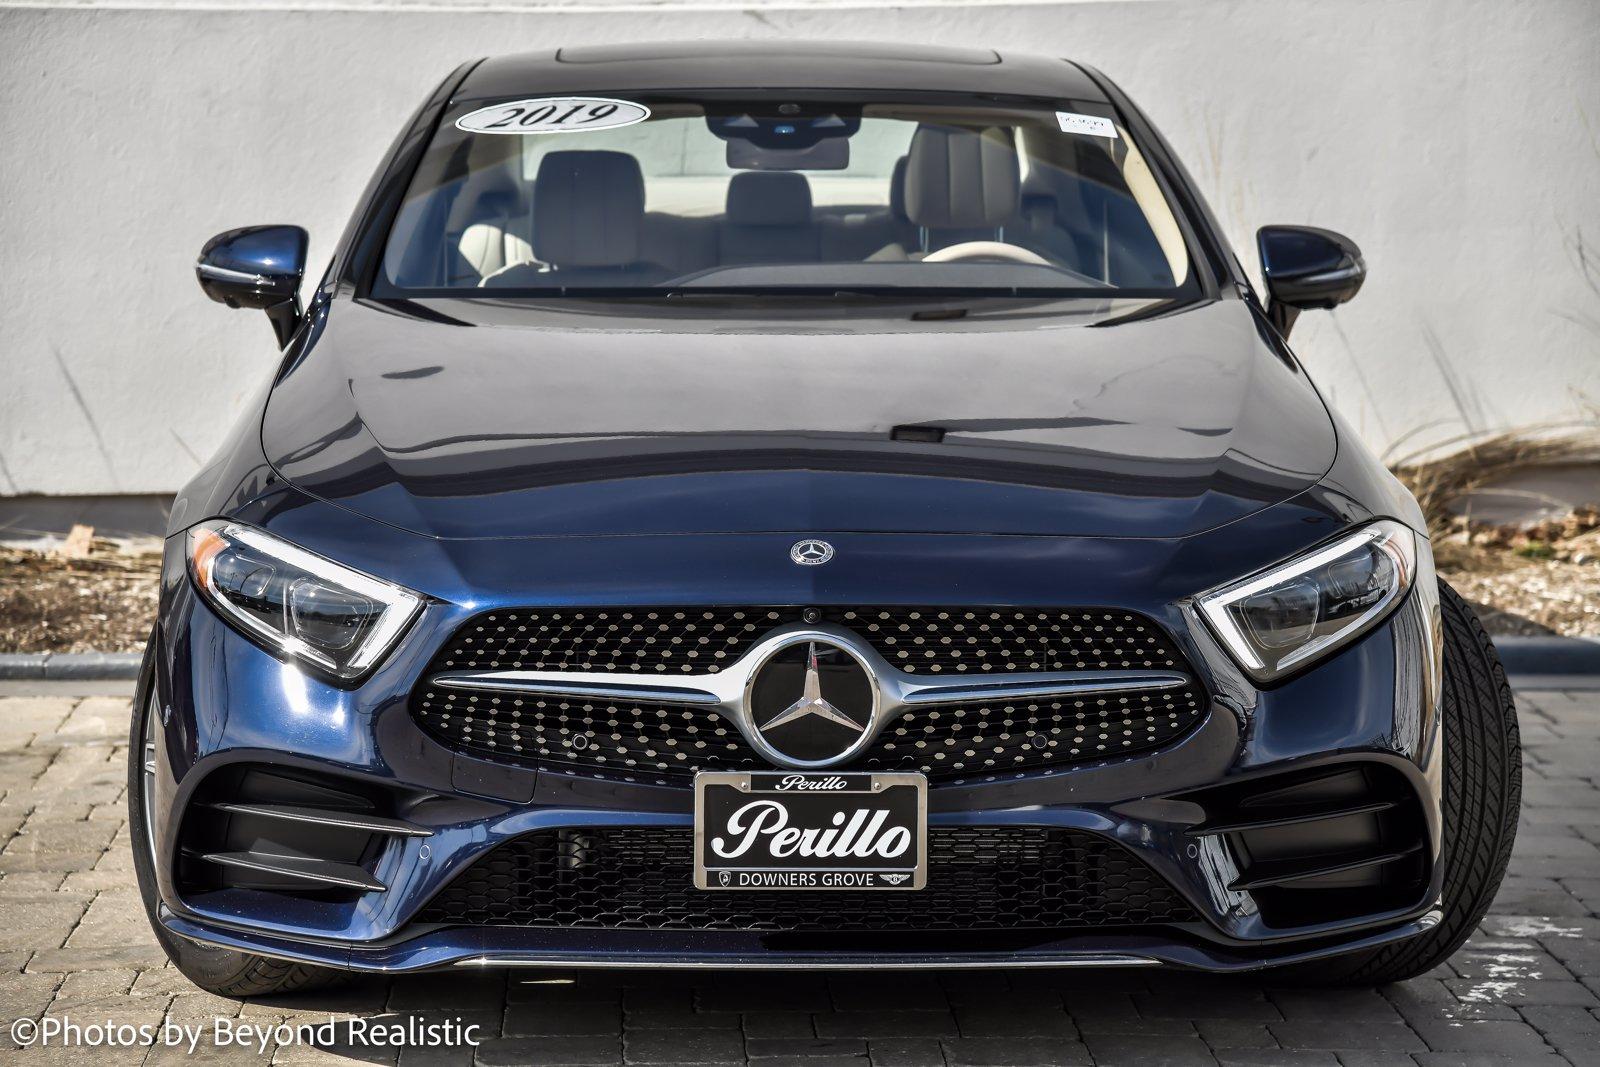 Used 2019 Mercedes-Benz CLS 450 AMG Line | Downers Grove, IL